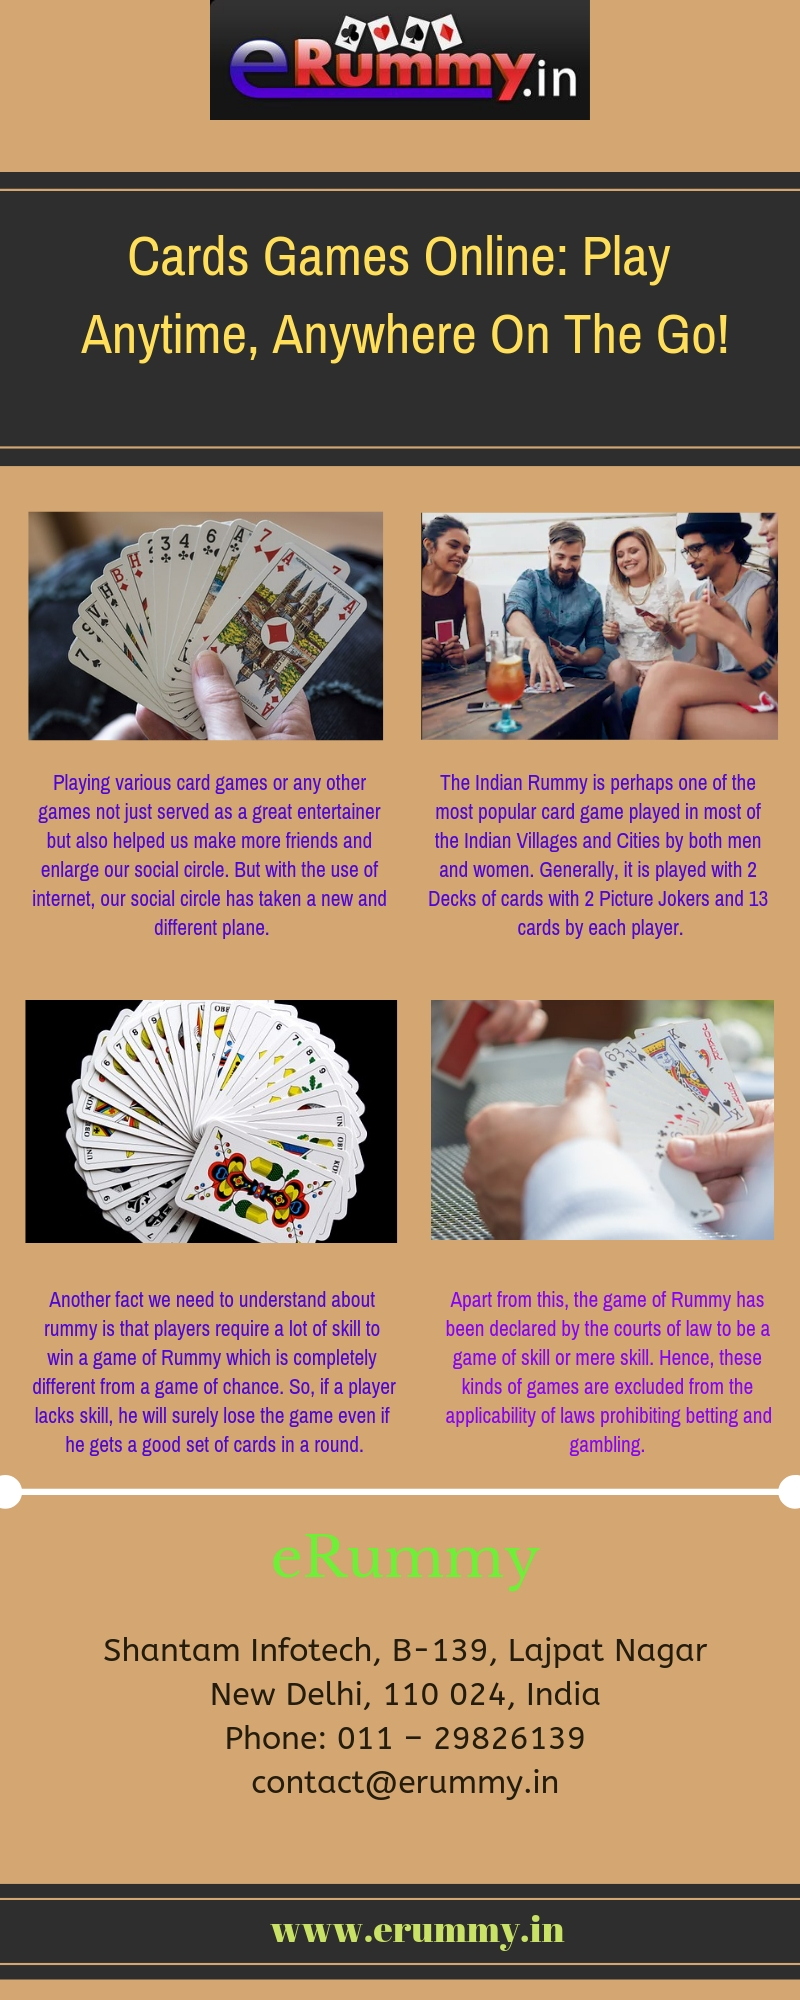 Cards Games Online- Play Anytime, Anywhere On The Go!.jpg Various card games have always been a great way to connect with your friends and social circle. But what if you get to play them online? For more details, visit this link: https://bit.ly/2GjQ698
 by Erummy